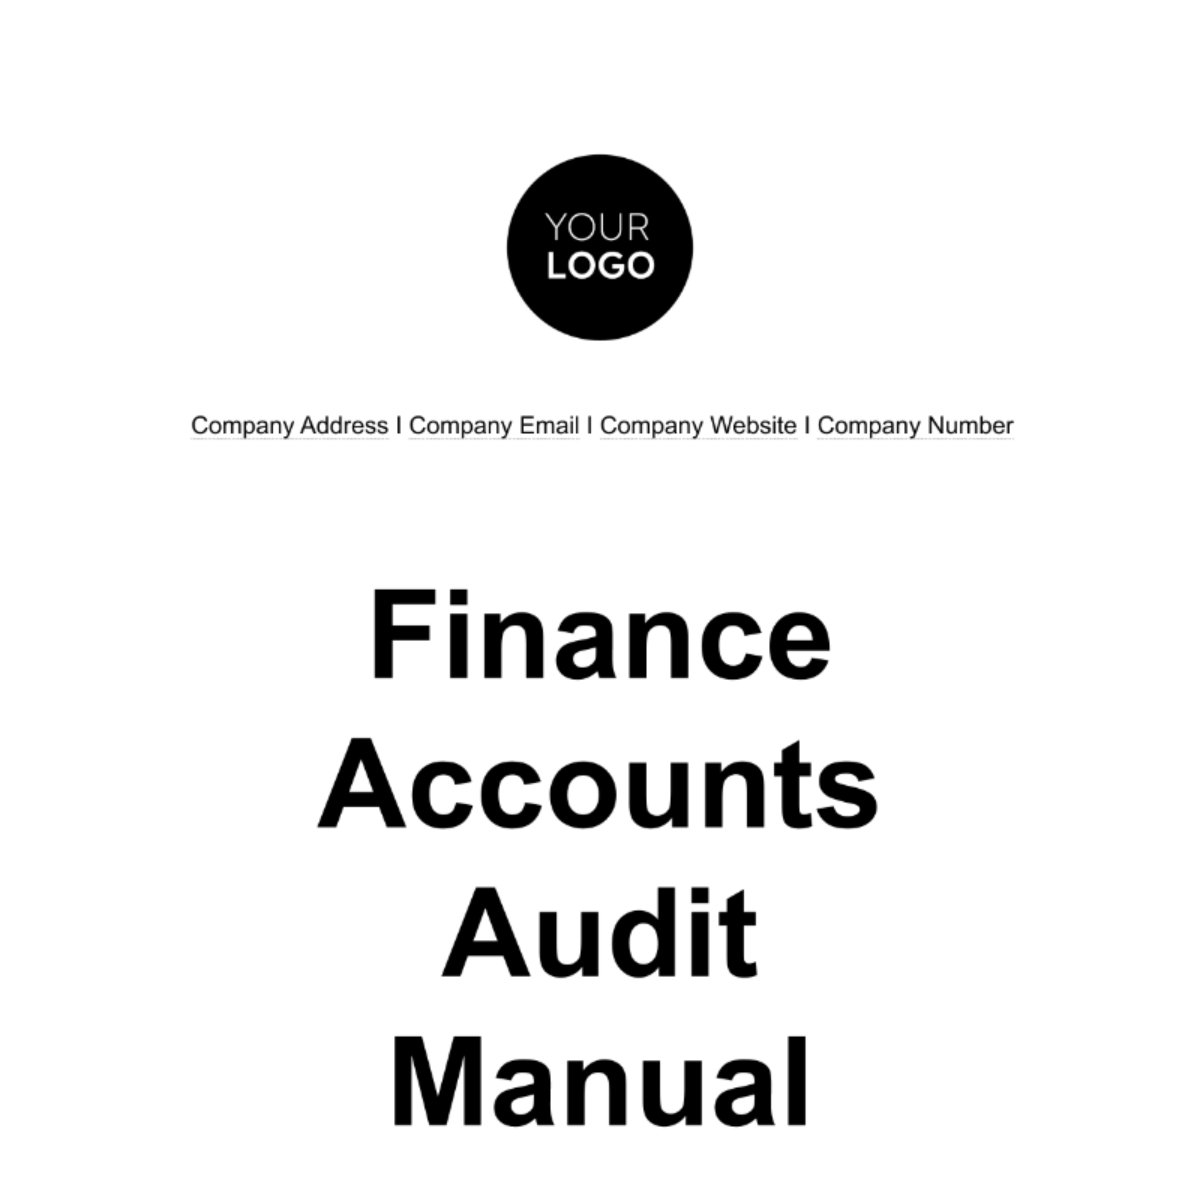 Free Finance Accounts Audit Manual Template